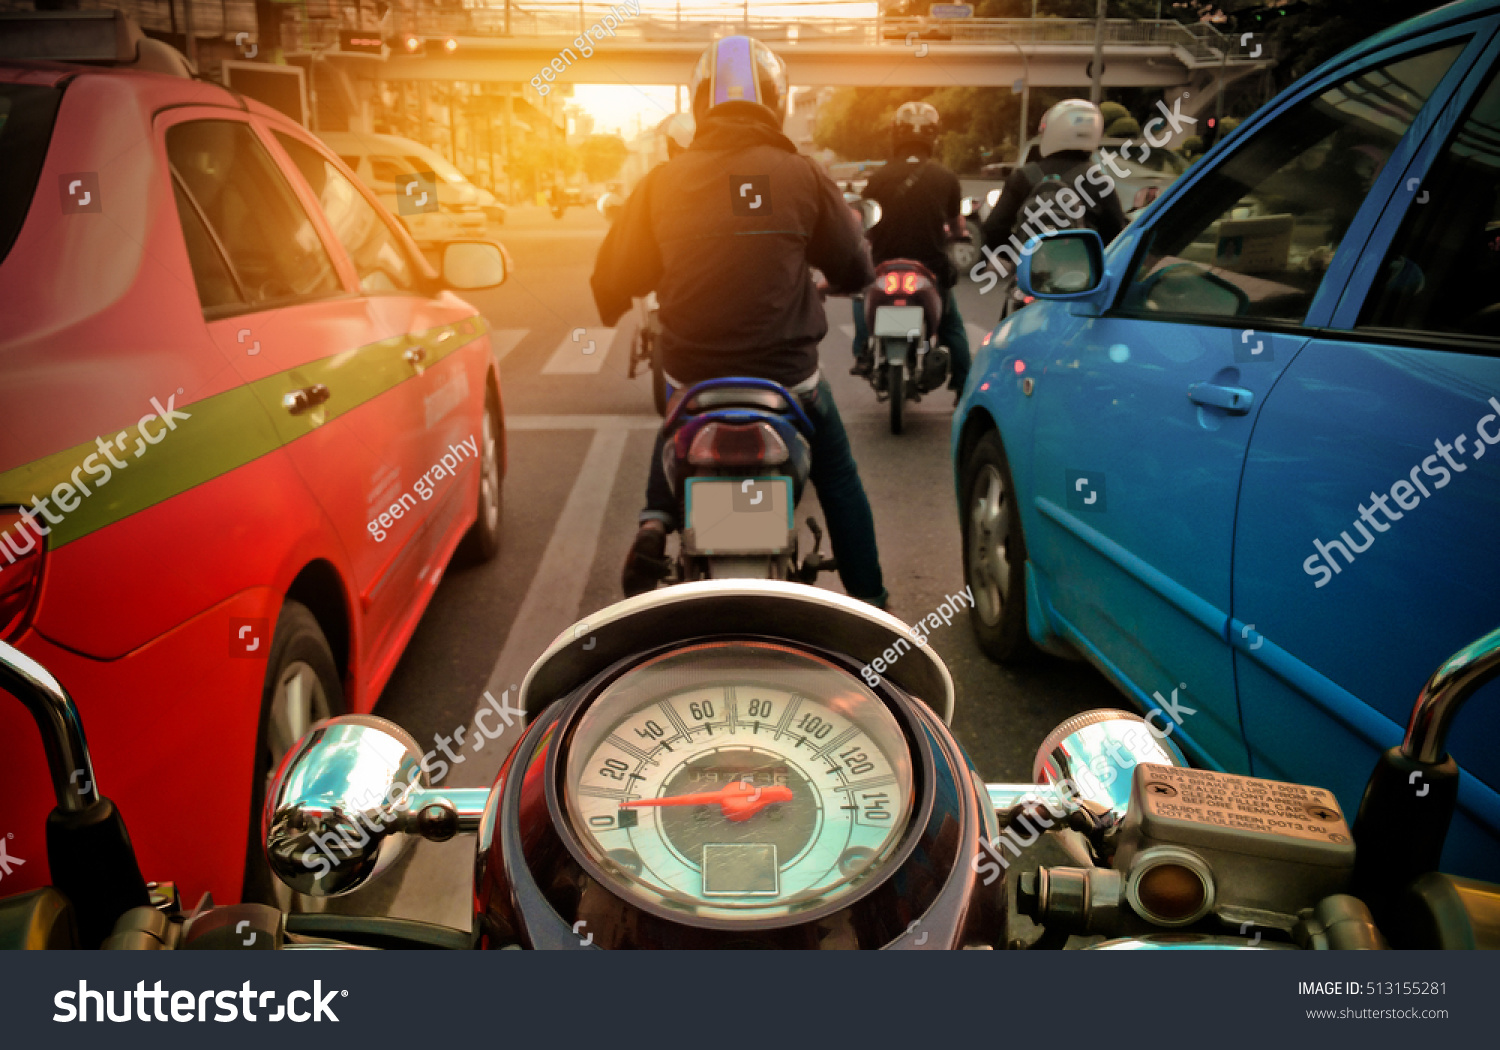 Behind the wheel of the motorcycle in the city #513155281